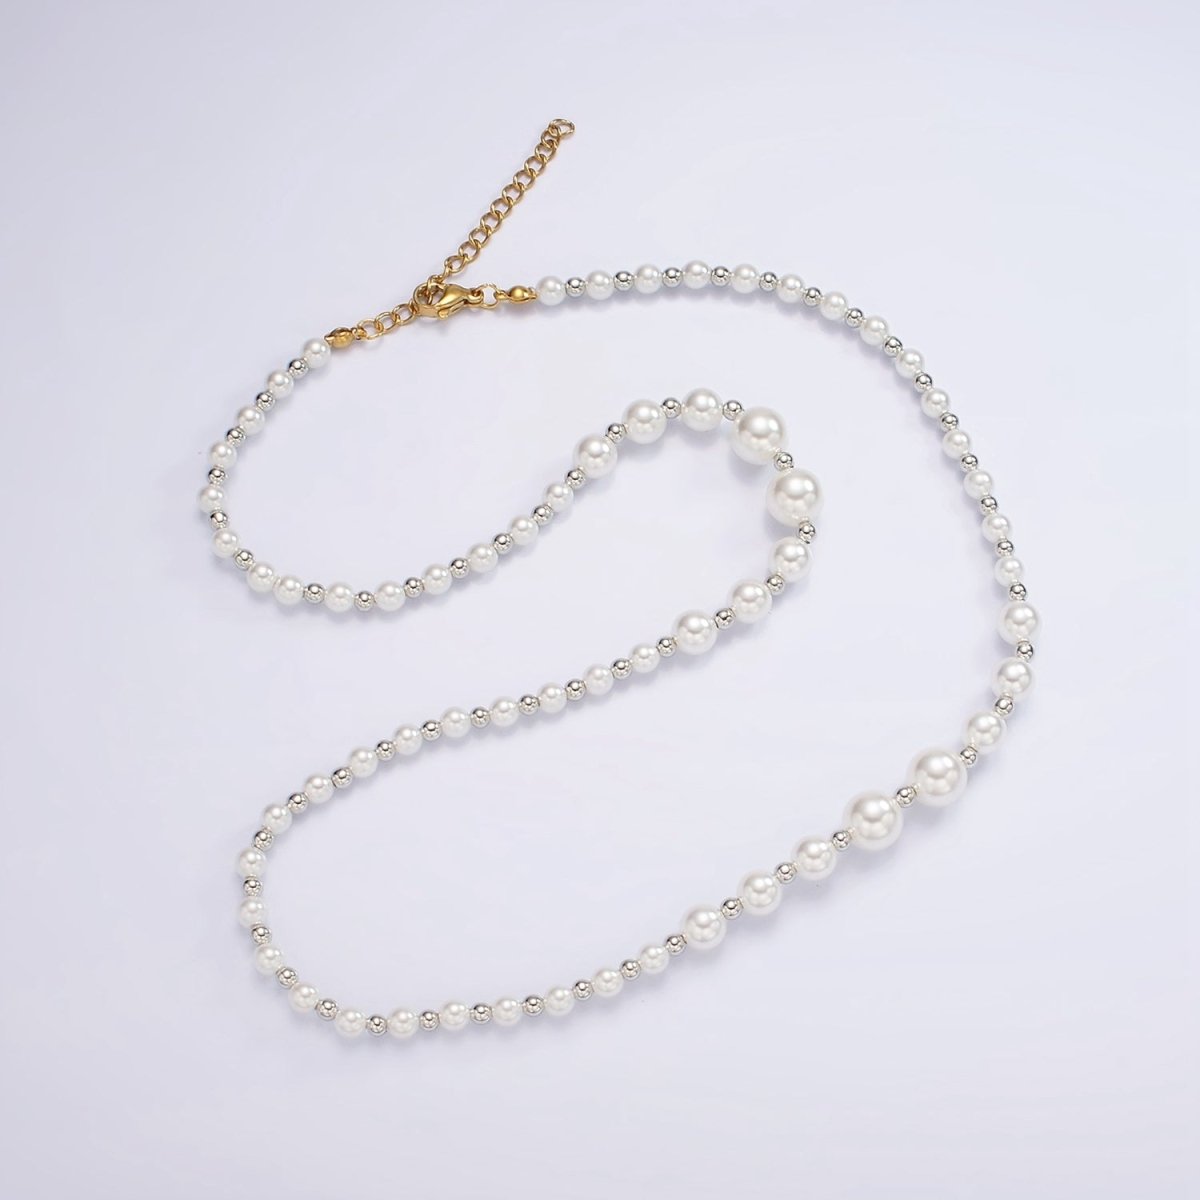 24K Gold Filled Irregular Round Shell Pearl Silver Bead 20 Inch Layering Mixed Metal Necklace | WA-2329 Clearance Pricing - DLUXCA